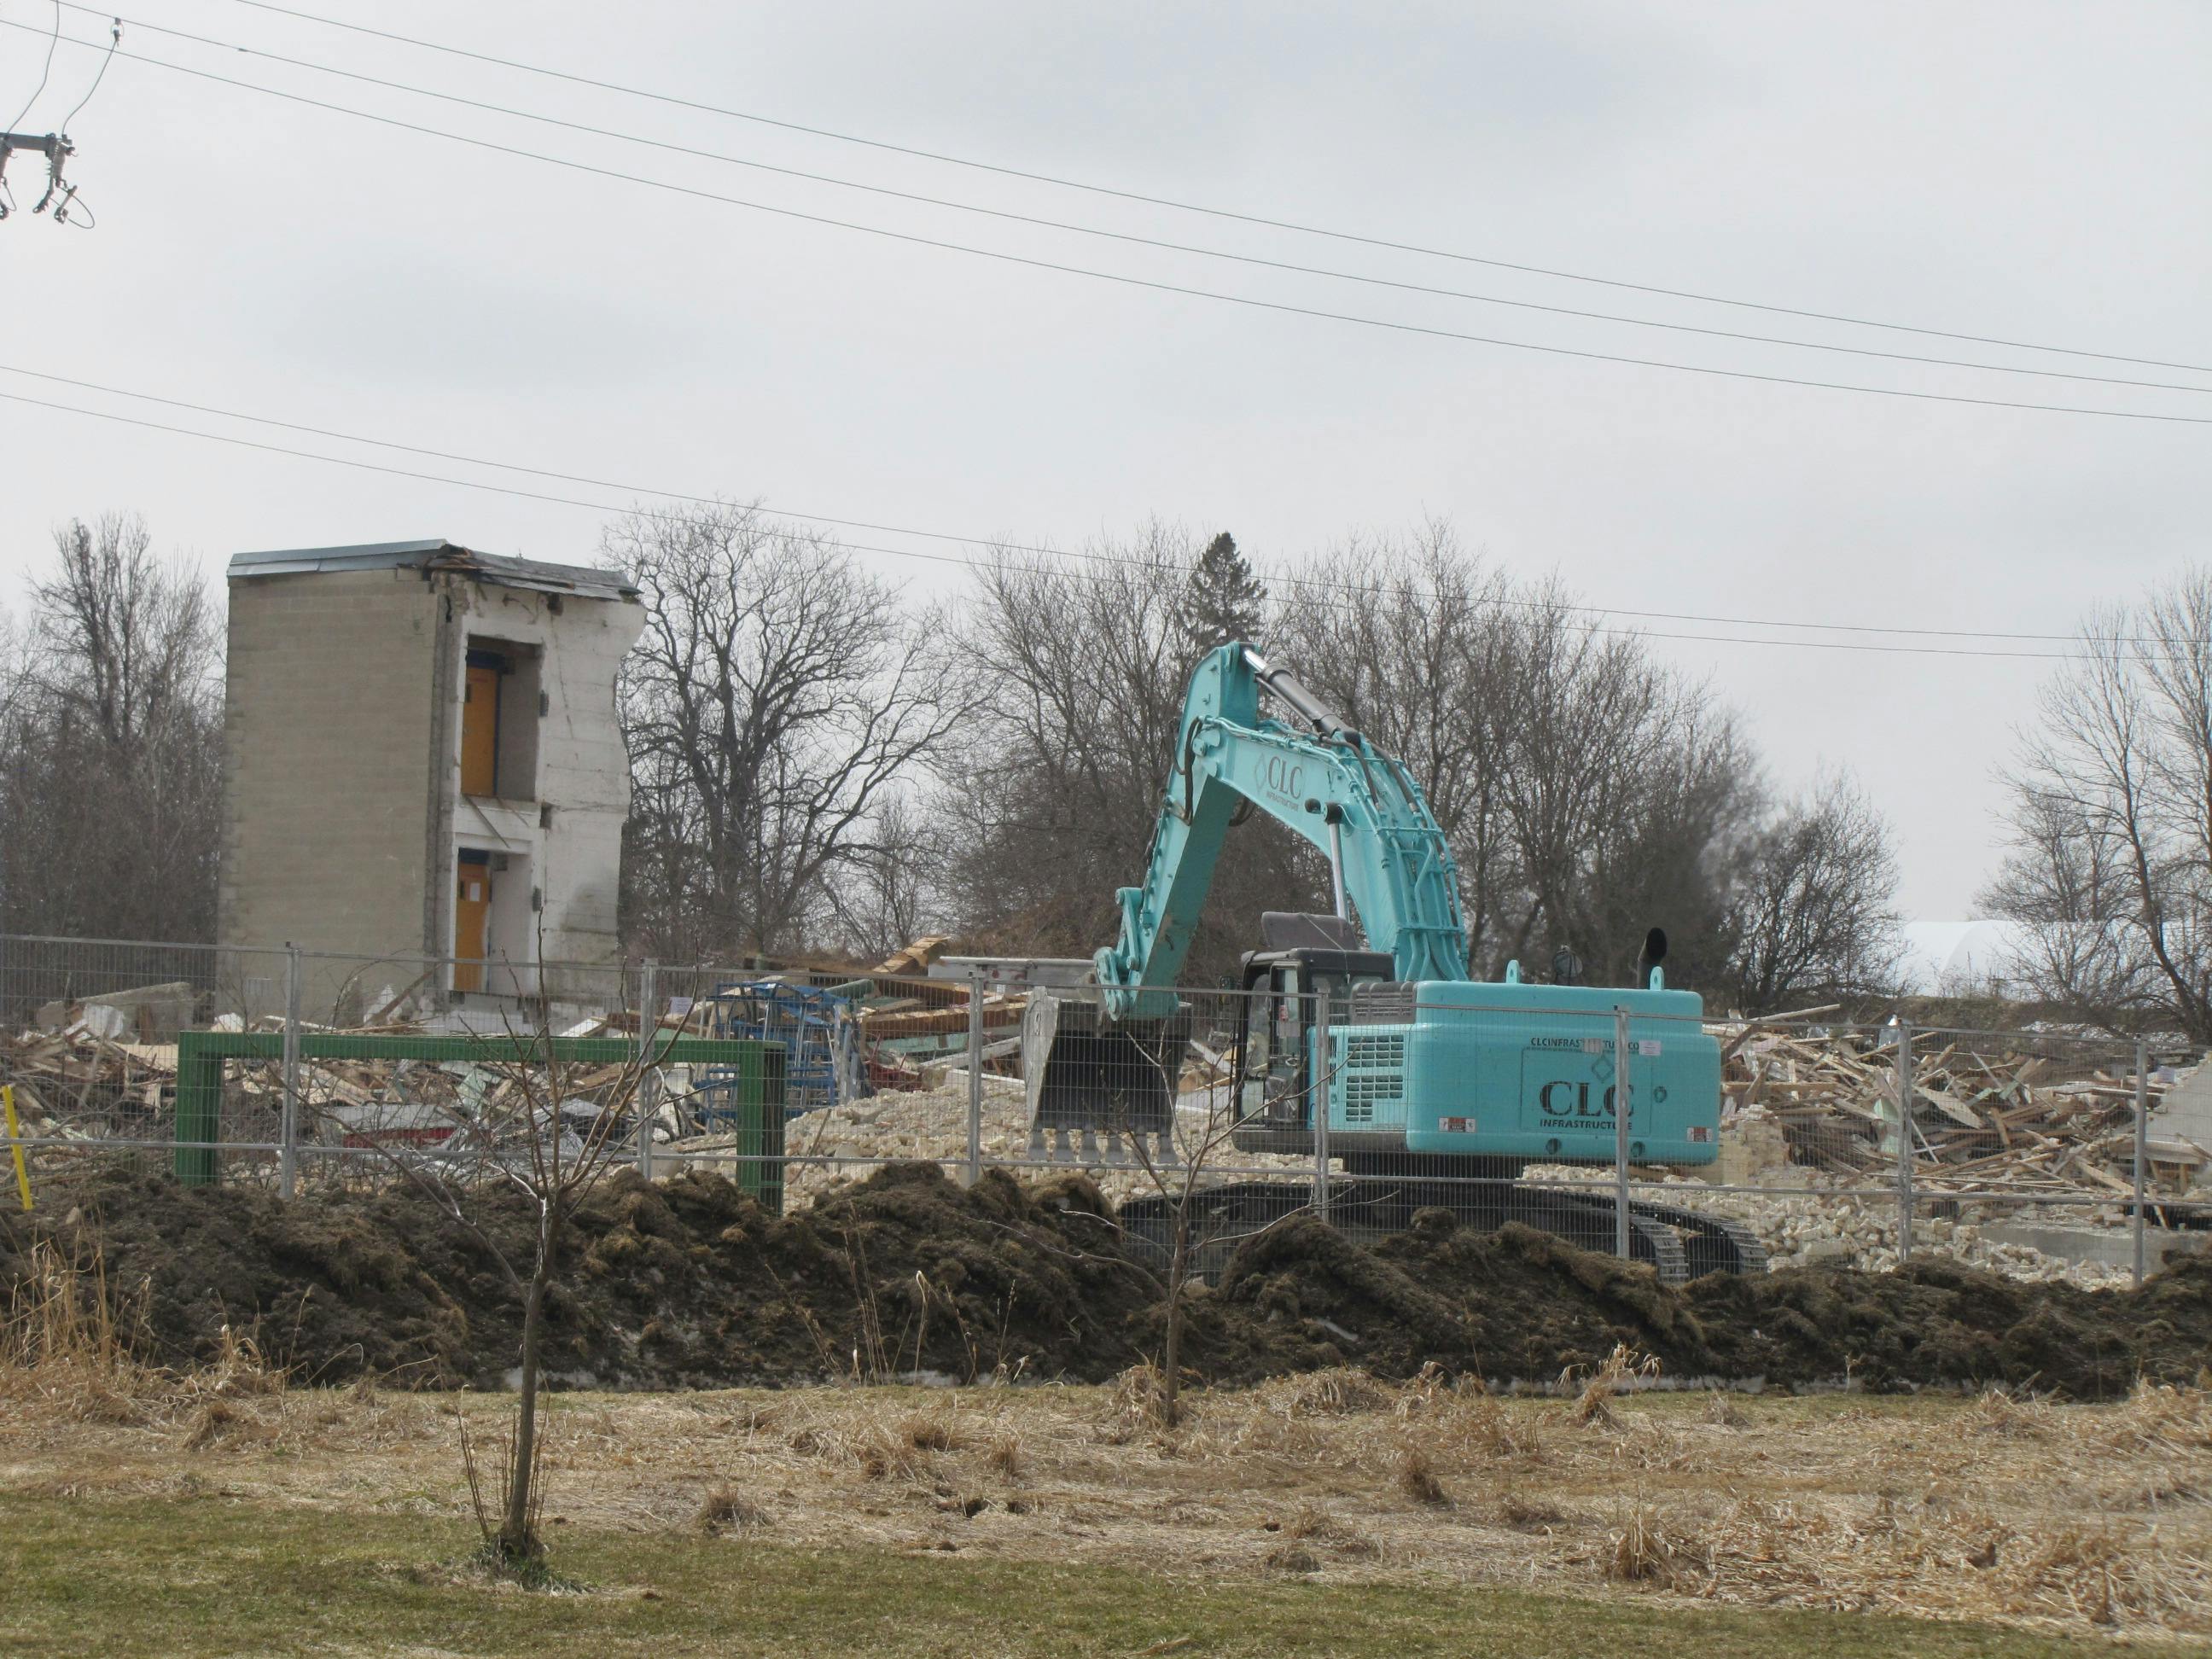 Demolition of Bogdon and Gross - March 17, 2021